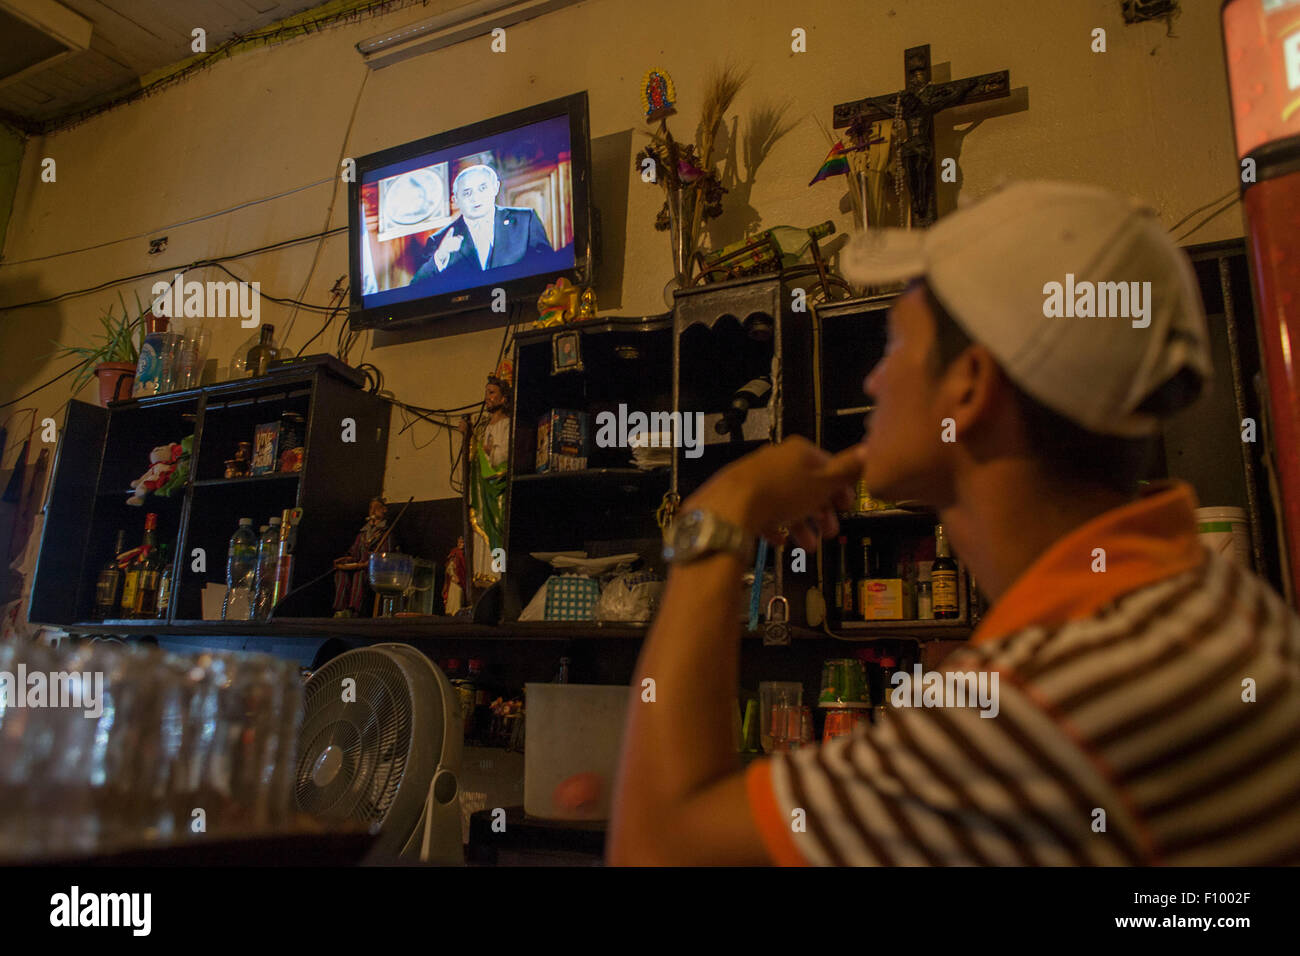 (150824) -- GUATEMALA CITY, Aug. 24, 2015 (Xinhua) -- A man watches TV as Guatemala's President Otto Perez Molina delivering a speech, in Guatemala City, Guatemala, on Aug. 23, 2015. President Otto Perez Molina says he won't resign from office despite investigators saying he may have been involved in a customs fraud scandal that has thrown the country into political crisis. (Xinhua/Luis Echeverria) Stock Photo